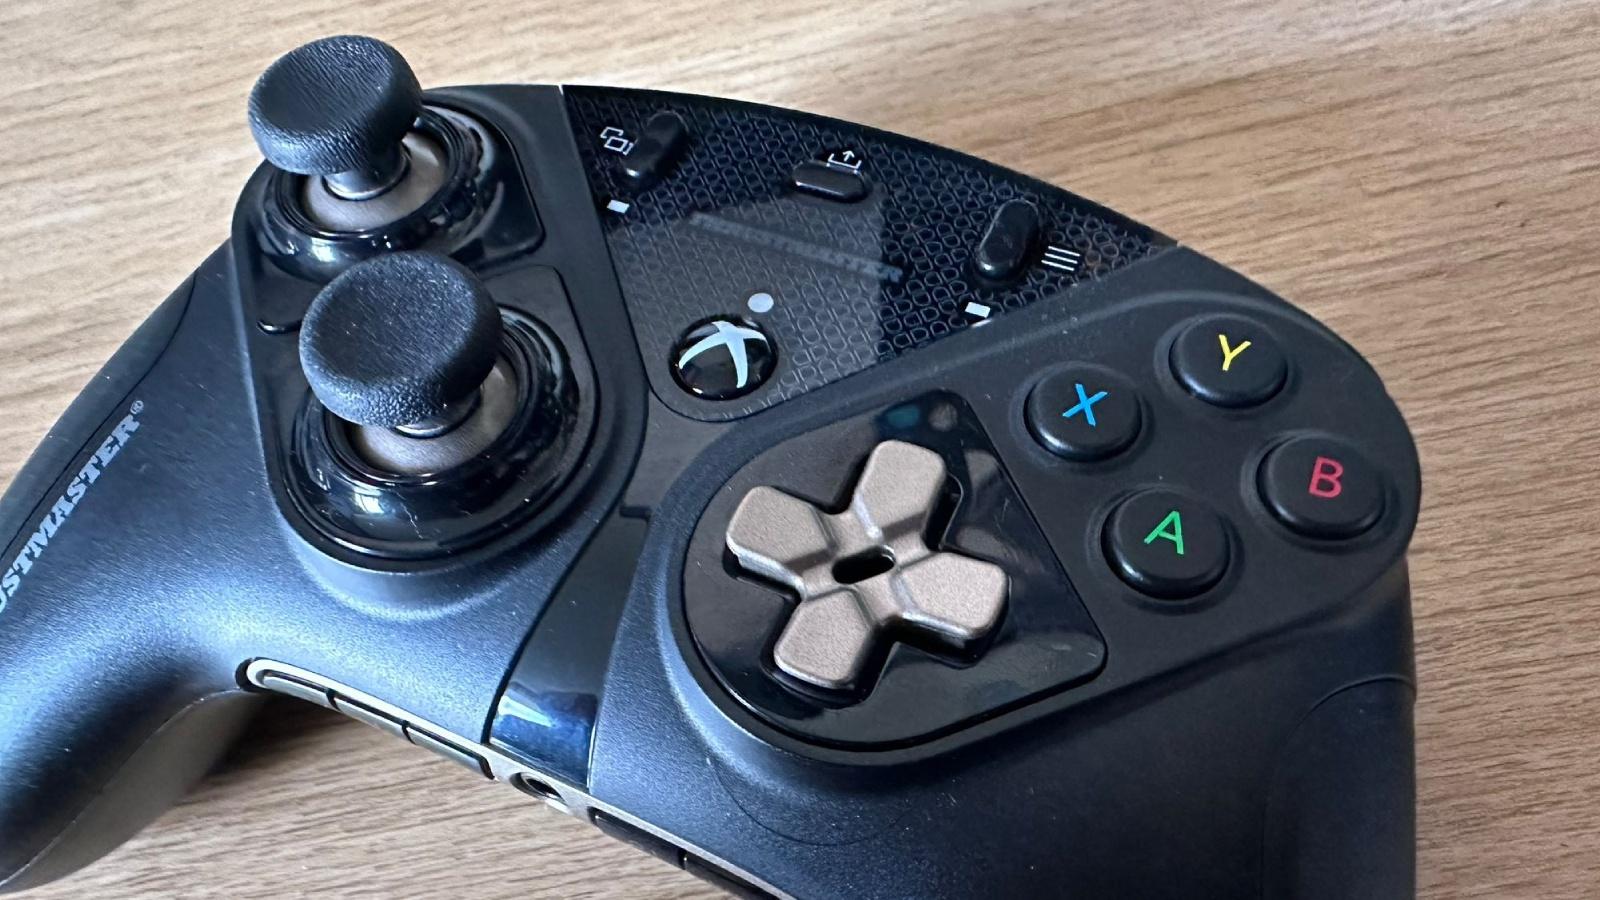 X how Thrustmaster Magnets, Pro review: they Dexerto - Eswap Controller do work?